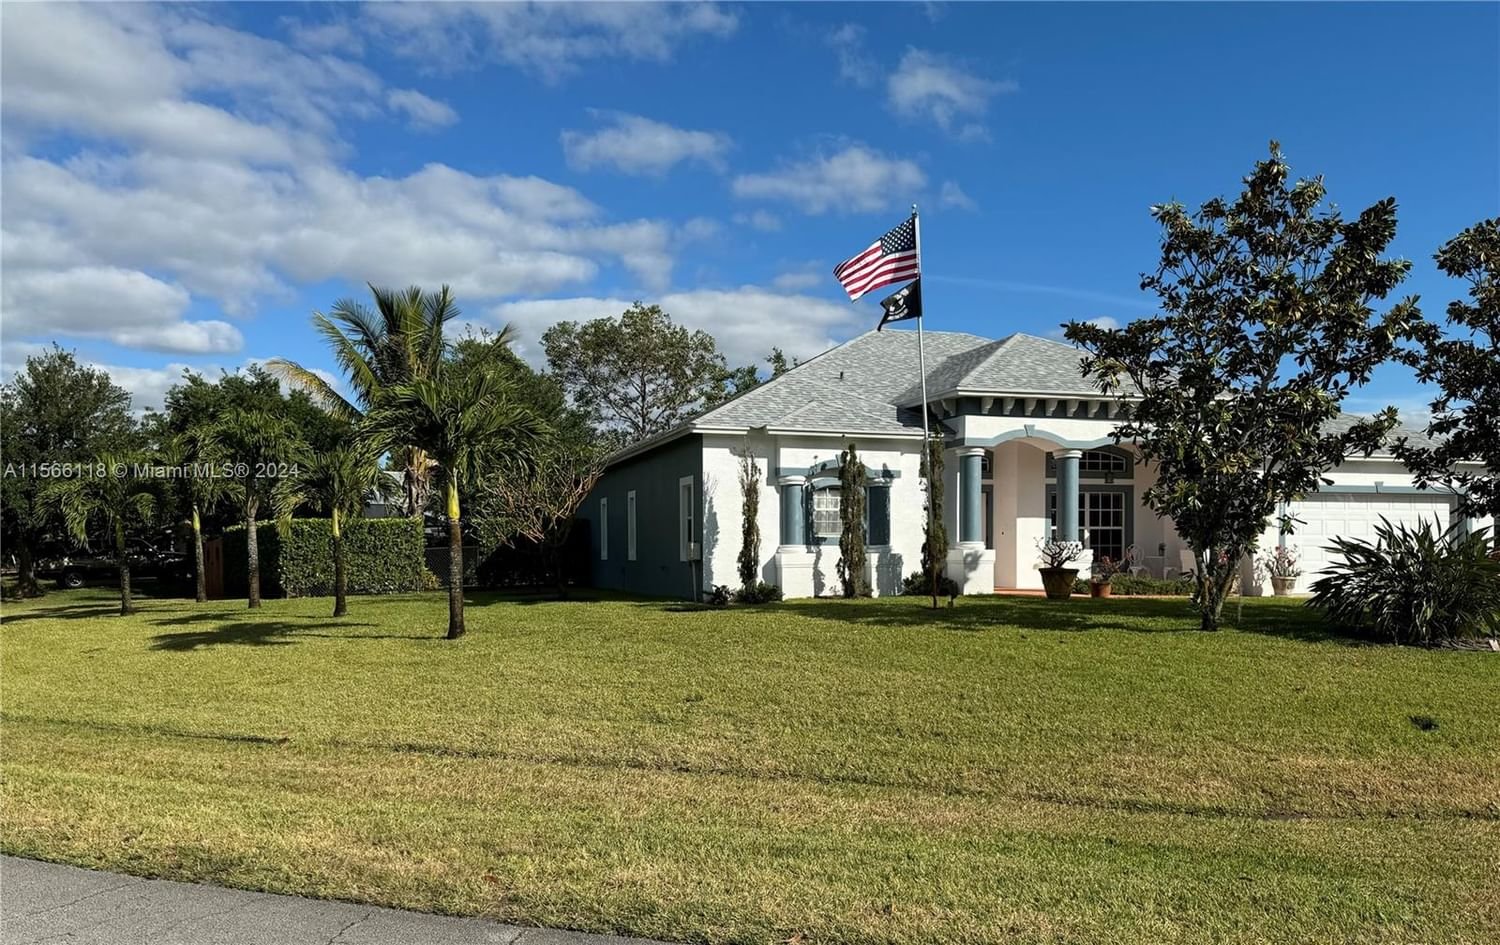 Real estate property located at 620 Homeland Rd, St Lucie County, PORT ST LUCIE SECTION 41, Port St. Lucie, FL